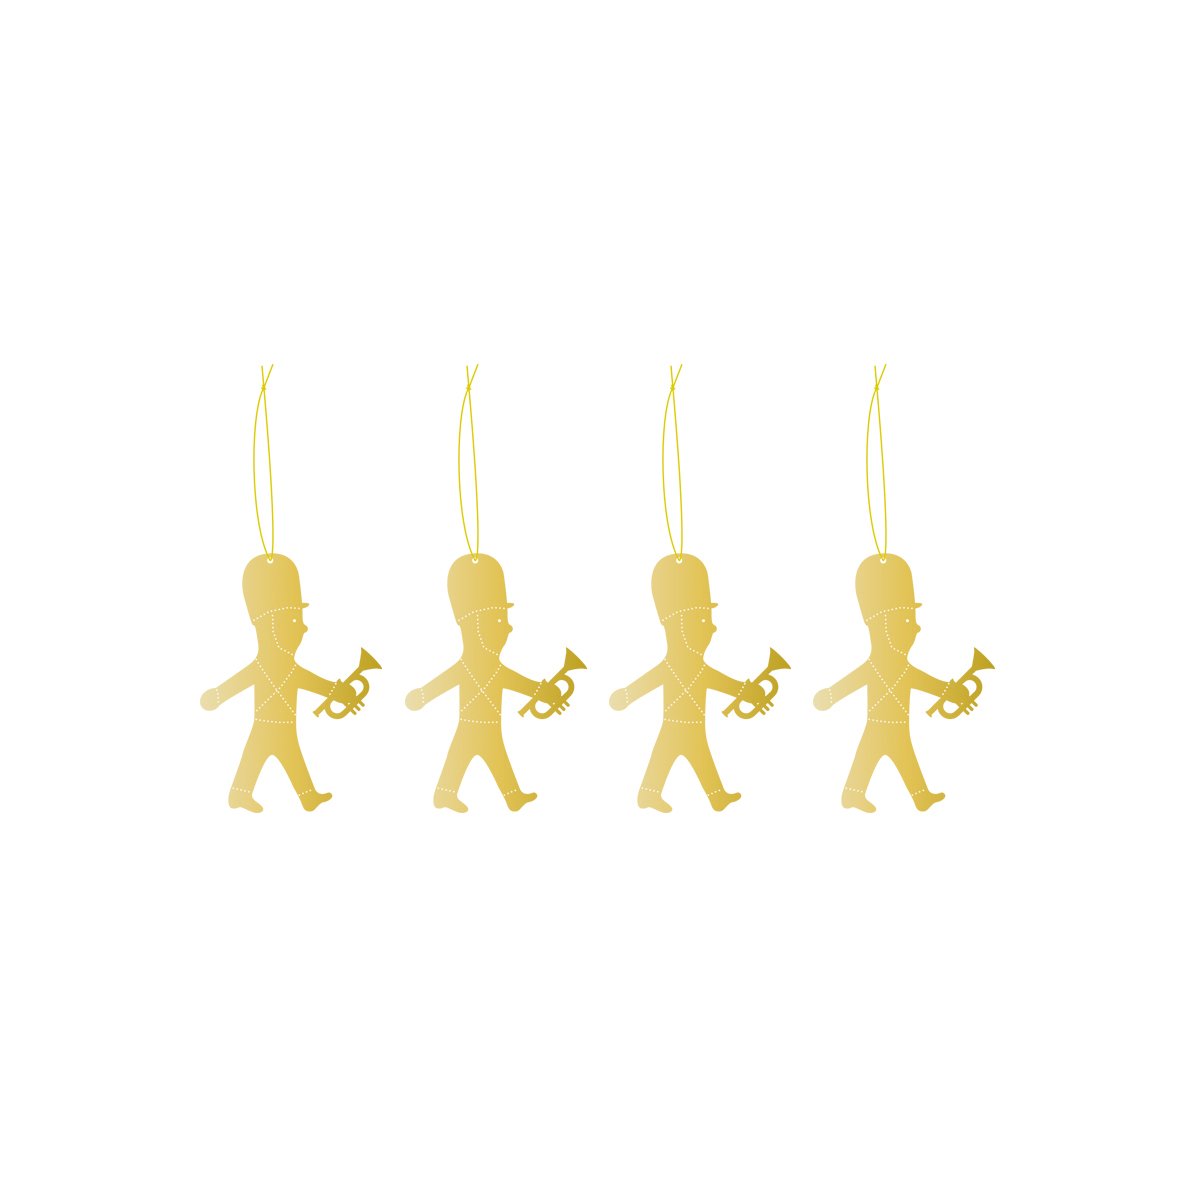 Cooee Design Cooee joulukoriste messinki 4-pack Trumpet boy